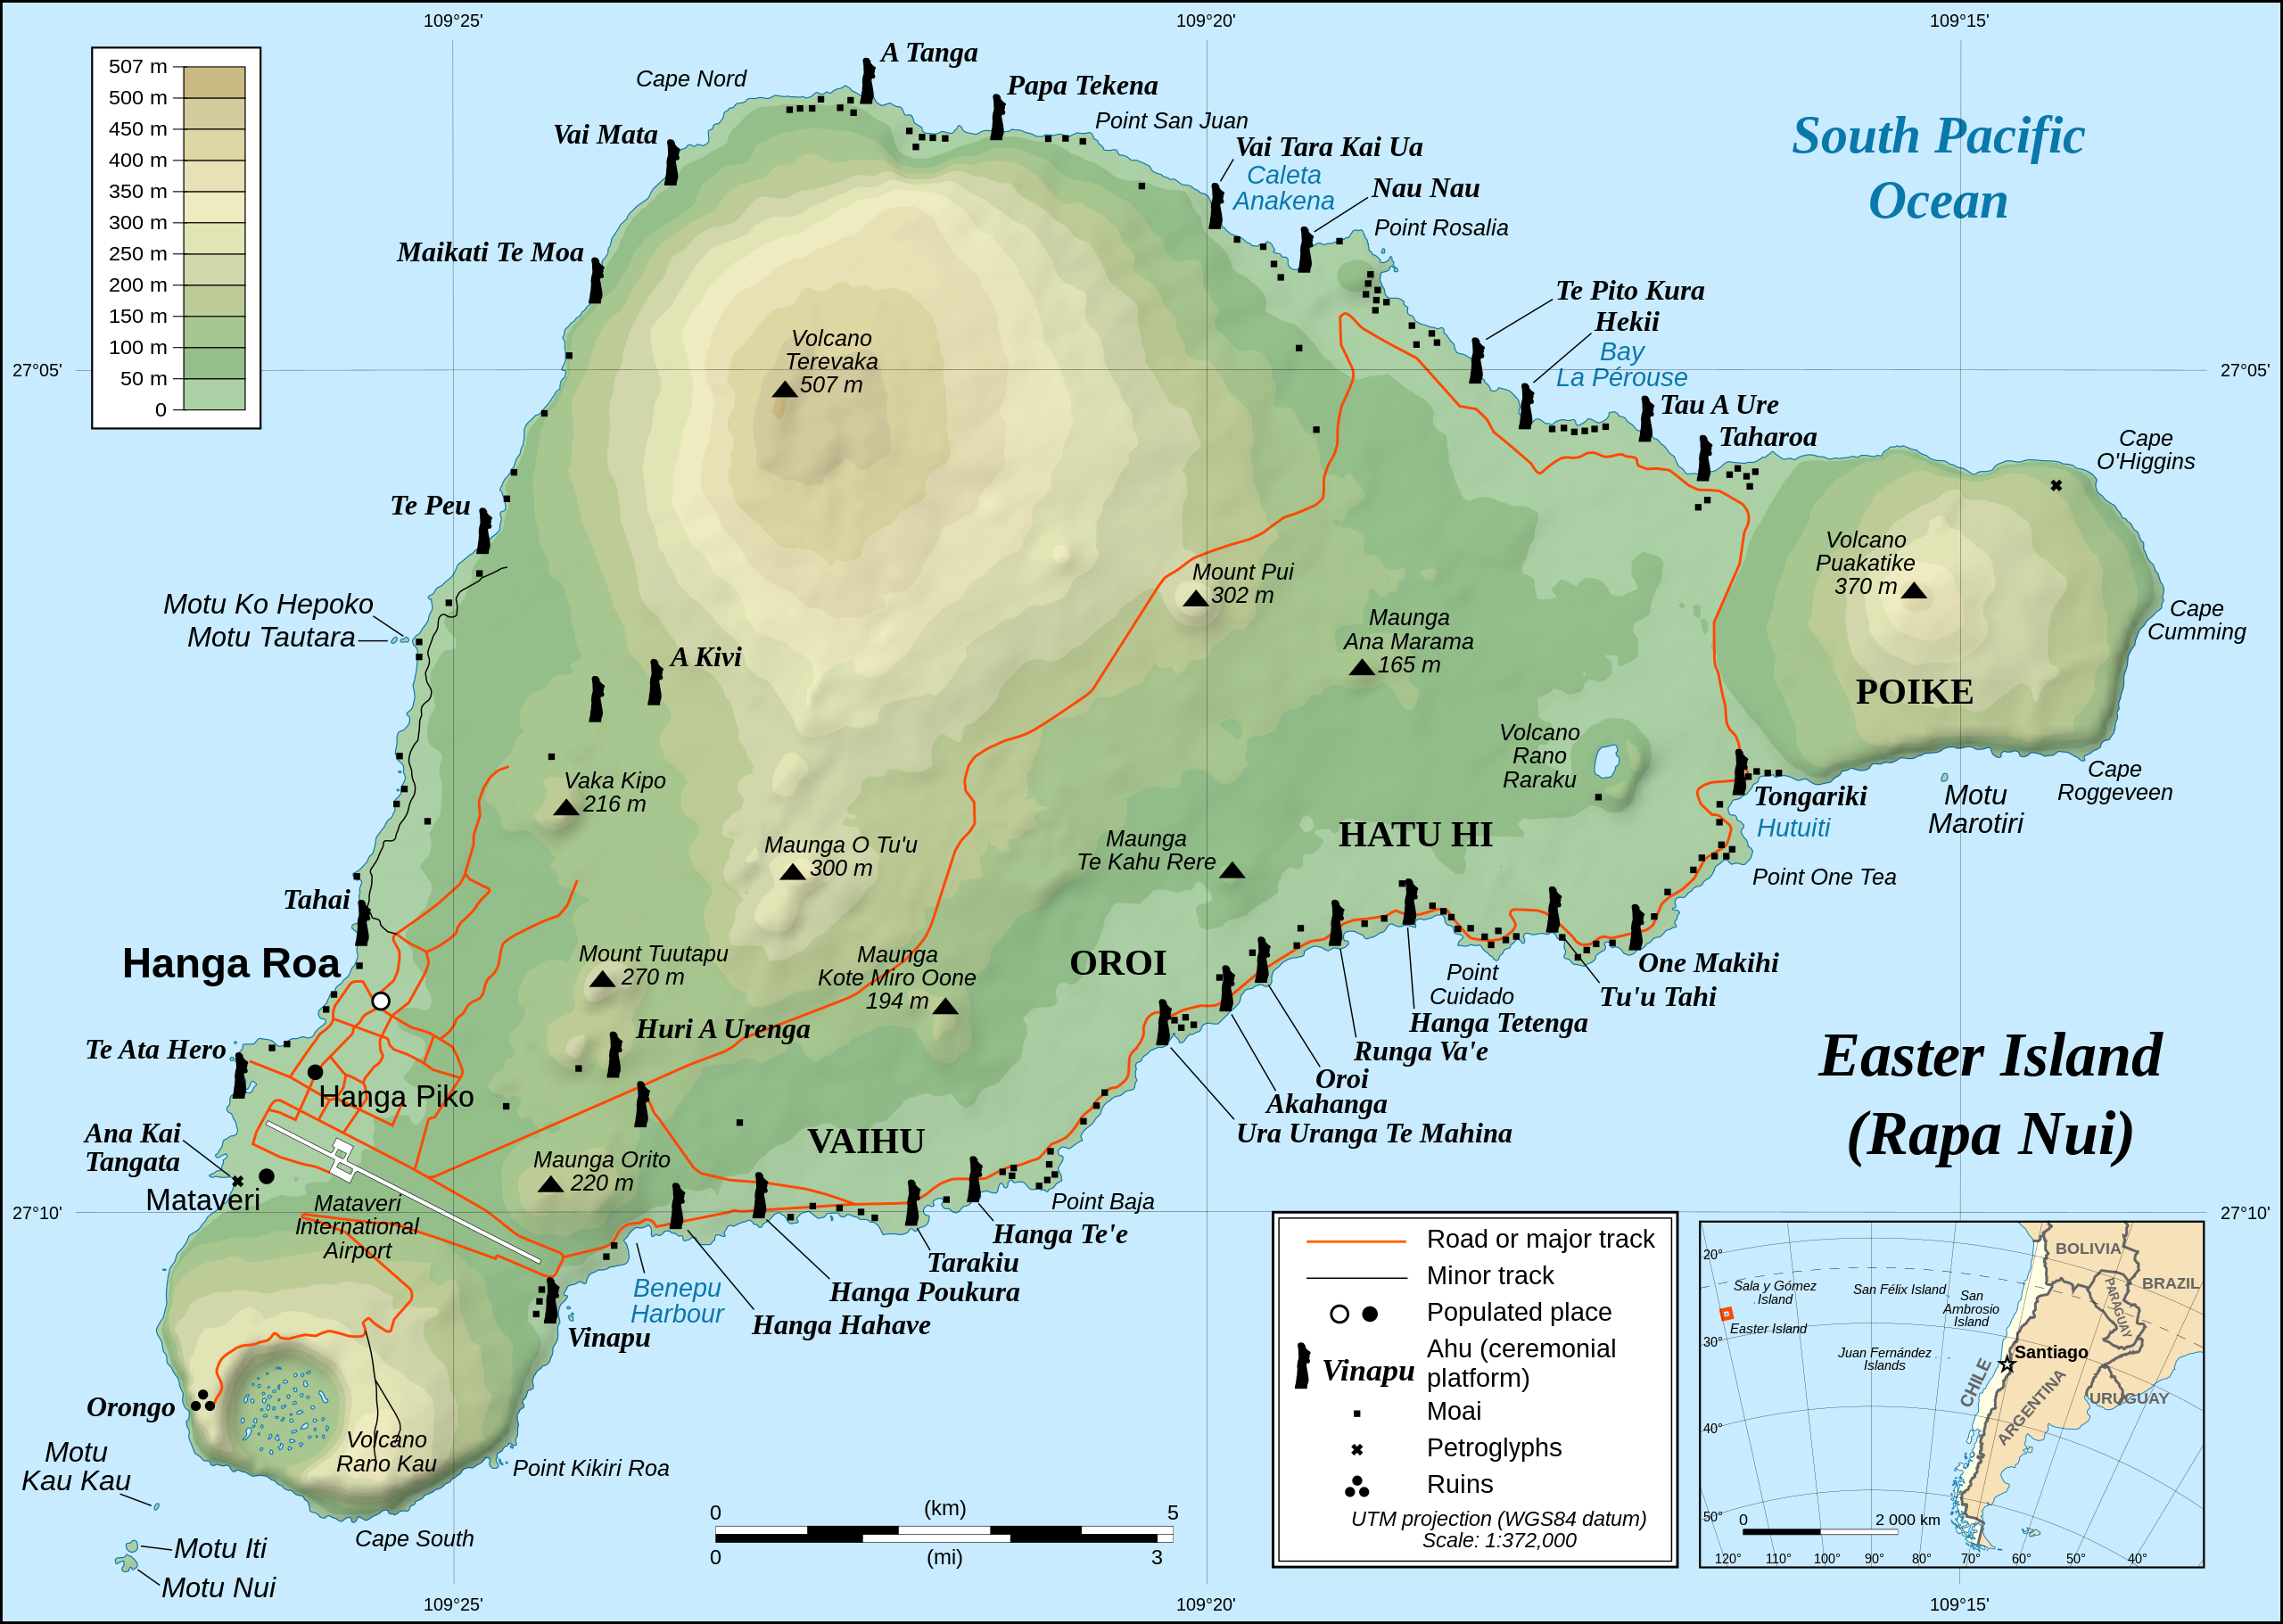 Detailed topographic map of Easter Island